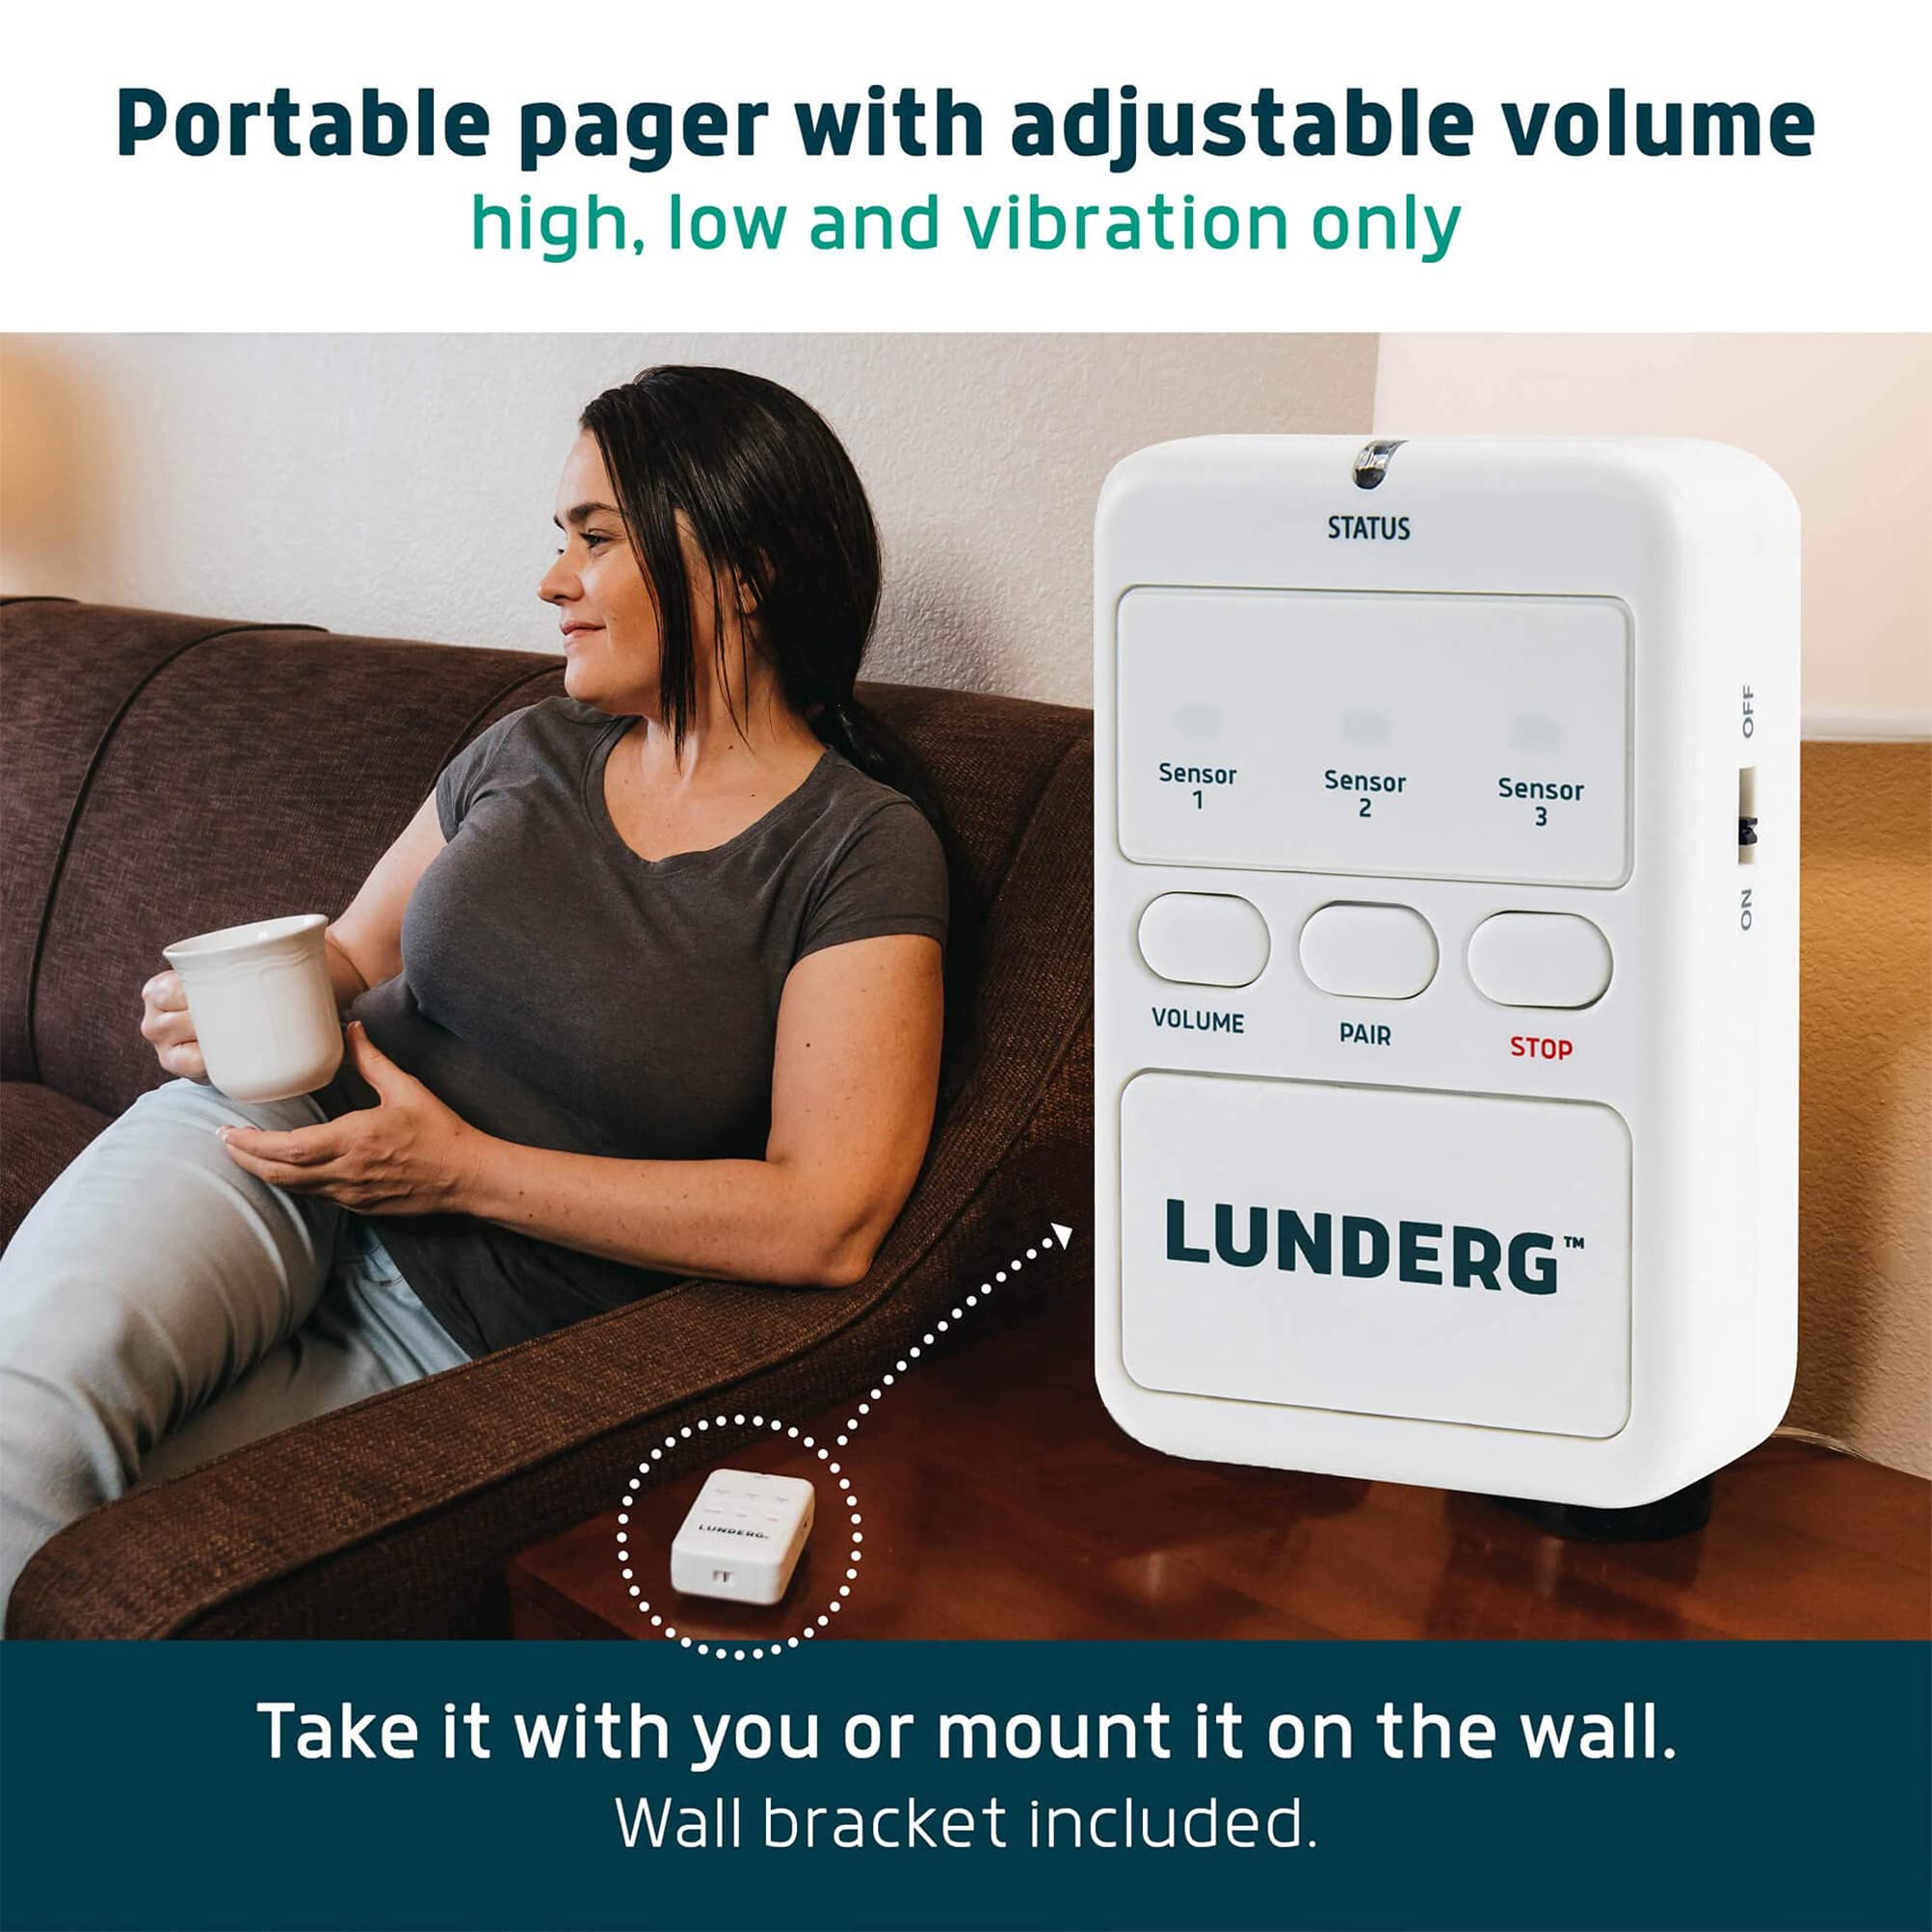 Lunderg Early Alert Bed Alarm System with 2 Wireless Sensor Pads, 1 Pager & 1 Call Button - Elderly Monitoring Kit with Pre-Alert Smart Technology - Bed Alarms and Fall Prevention for Elderly